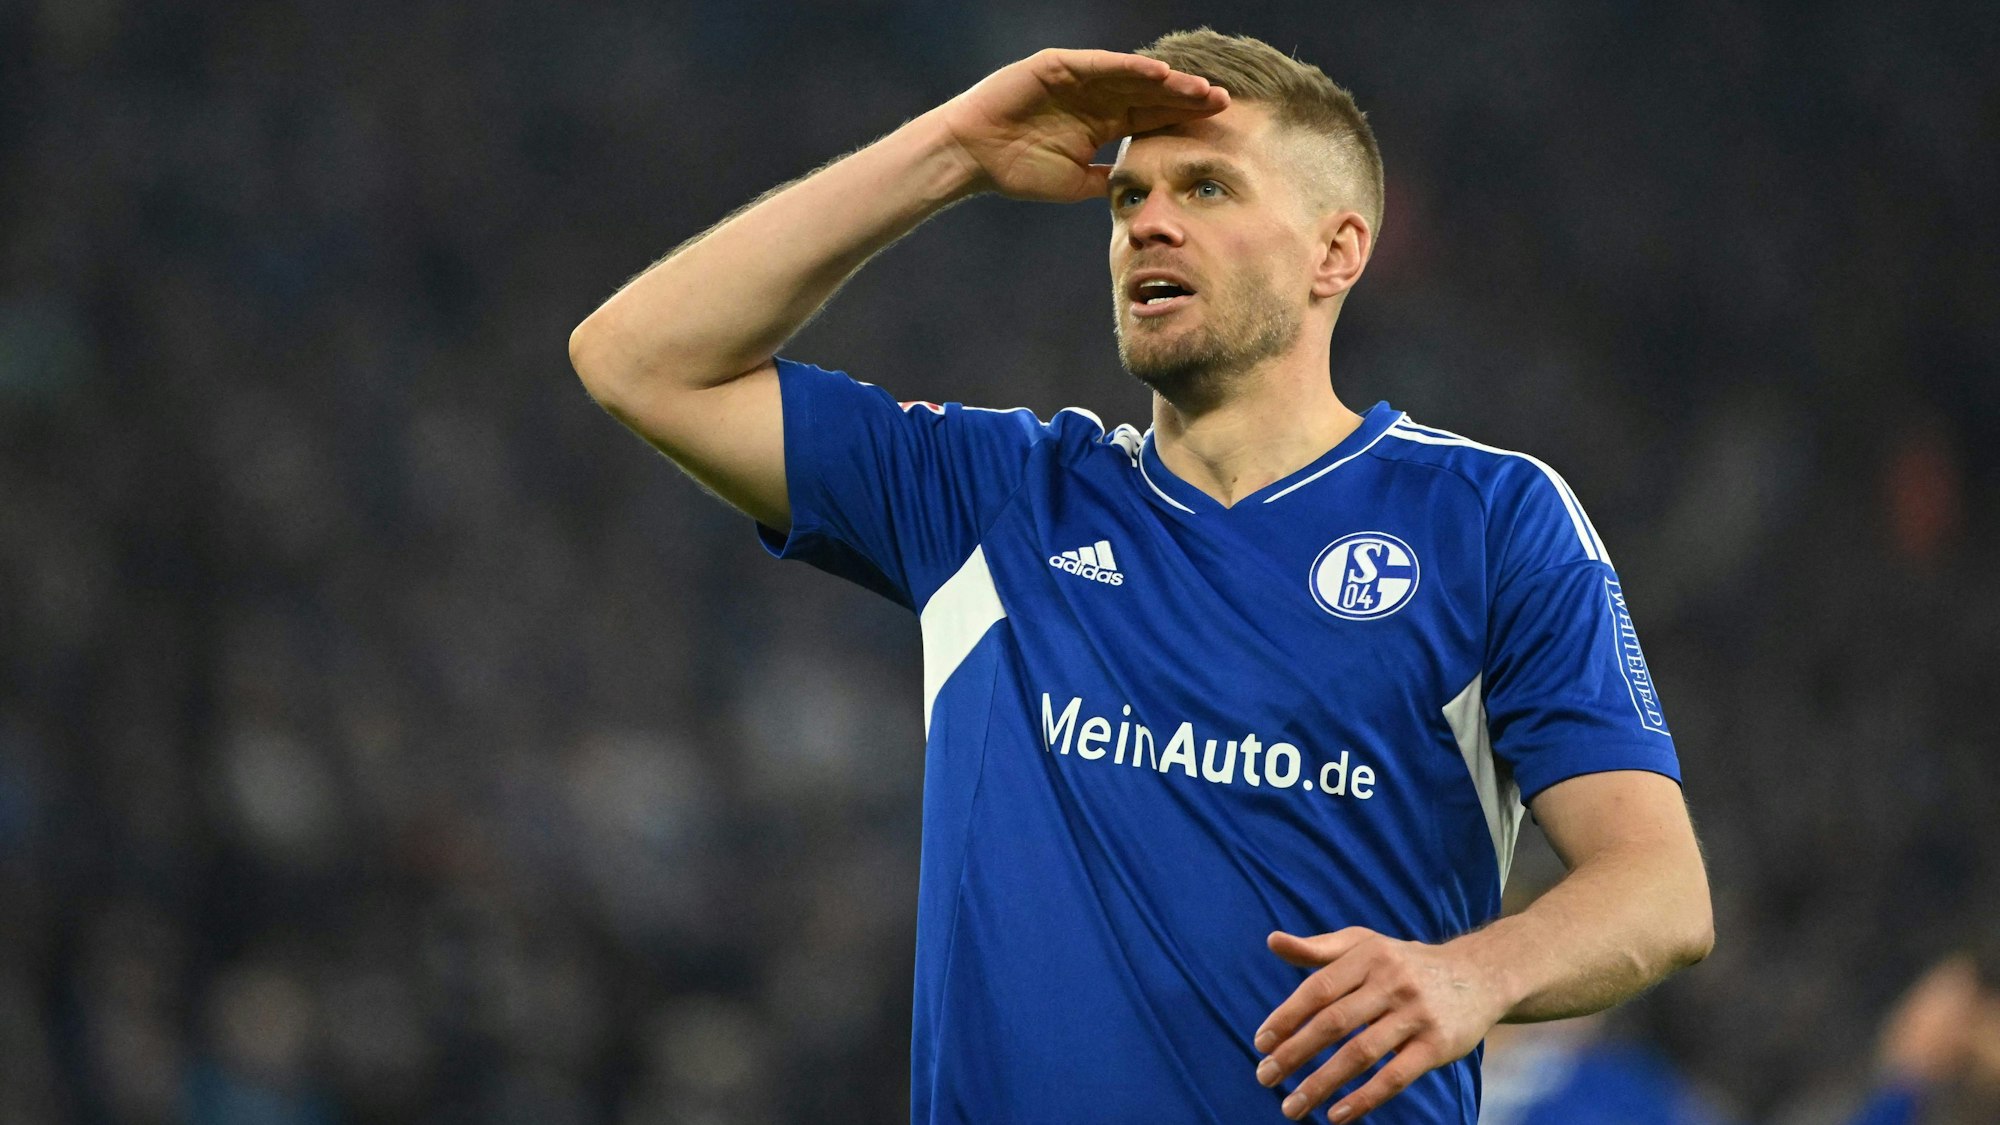 Schalke's German forward Simon Terodde celebrates scoring the 3-1 goal during the German first division Bundesliga football match between FC Schalke 04 and Hertha Berlin in Gelsenkirchen, western Germany, on April 14, 2023. (Photo by INA FASSBENDER / AFP) / DFL REGULATIONS PROHIBIT ANY USE OF PHOTOGRAPHS AS IMAGE SEQUENCES AND/OR QUASI-VIDEO